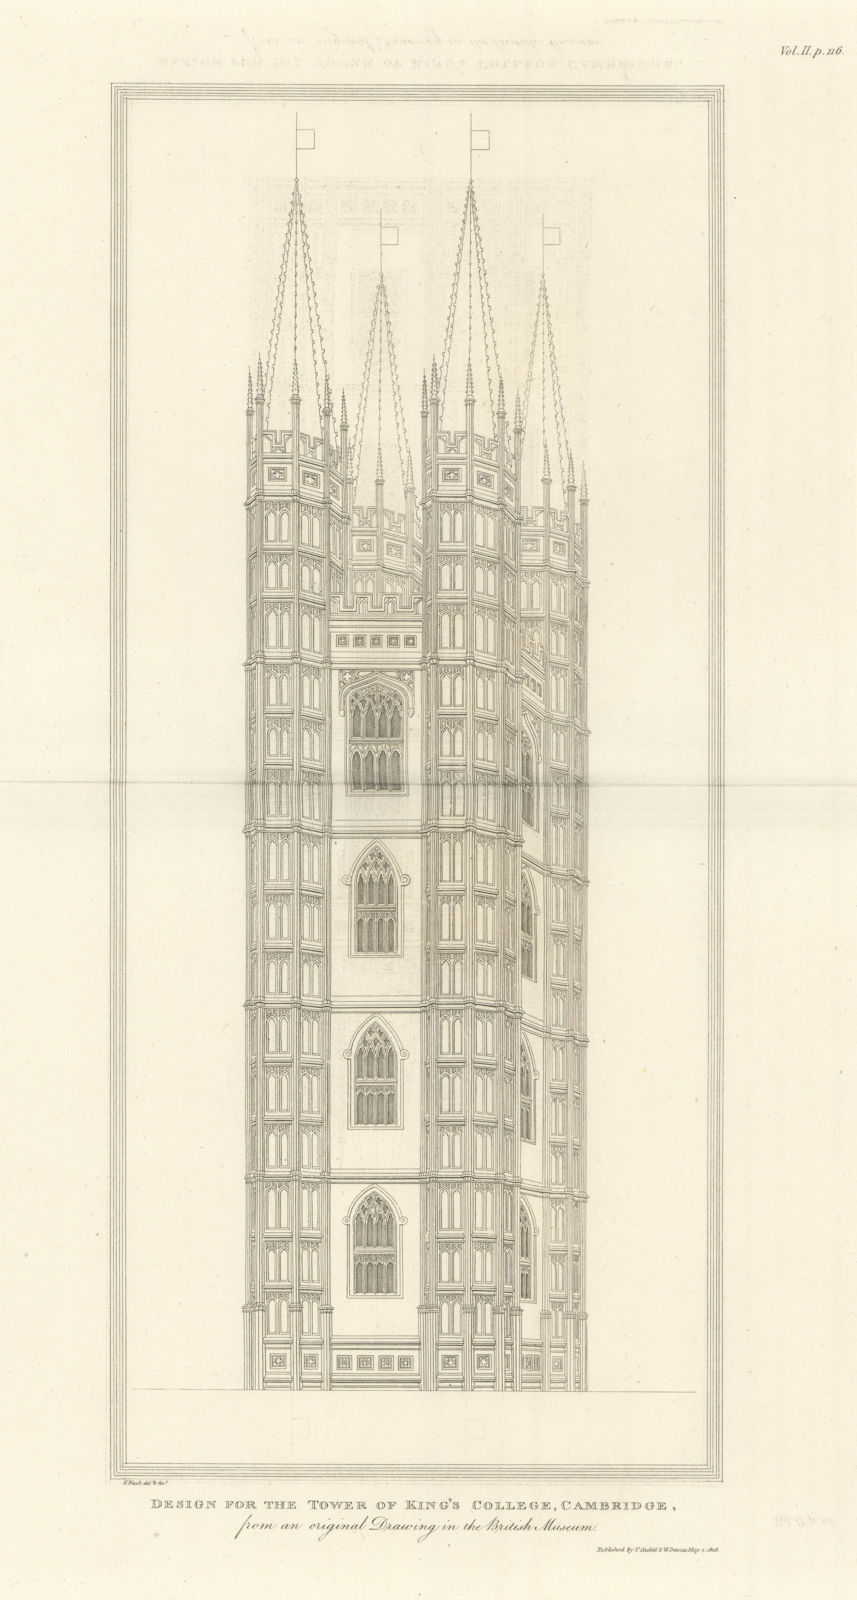 Associate Product Design for Kings College Tower, Cambridge. NASH 1810 old antique print picture